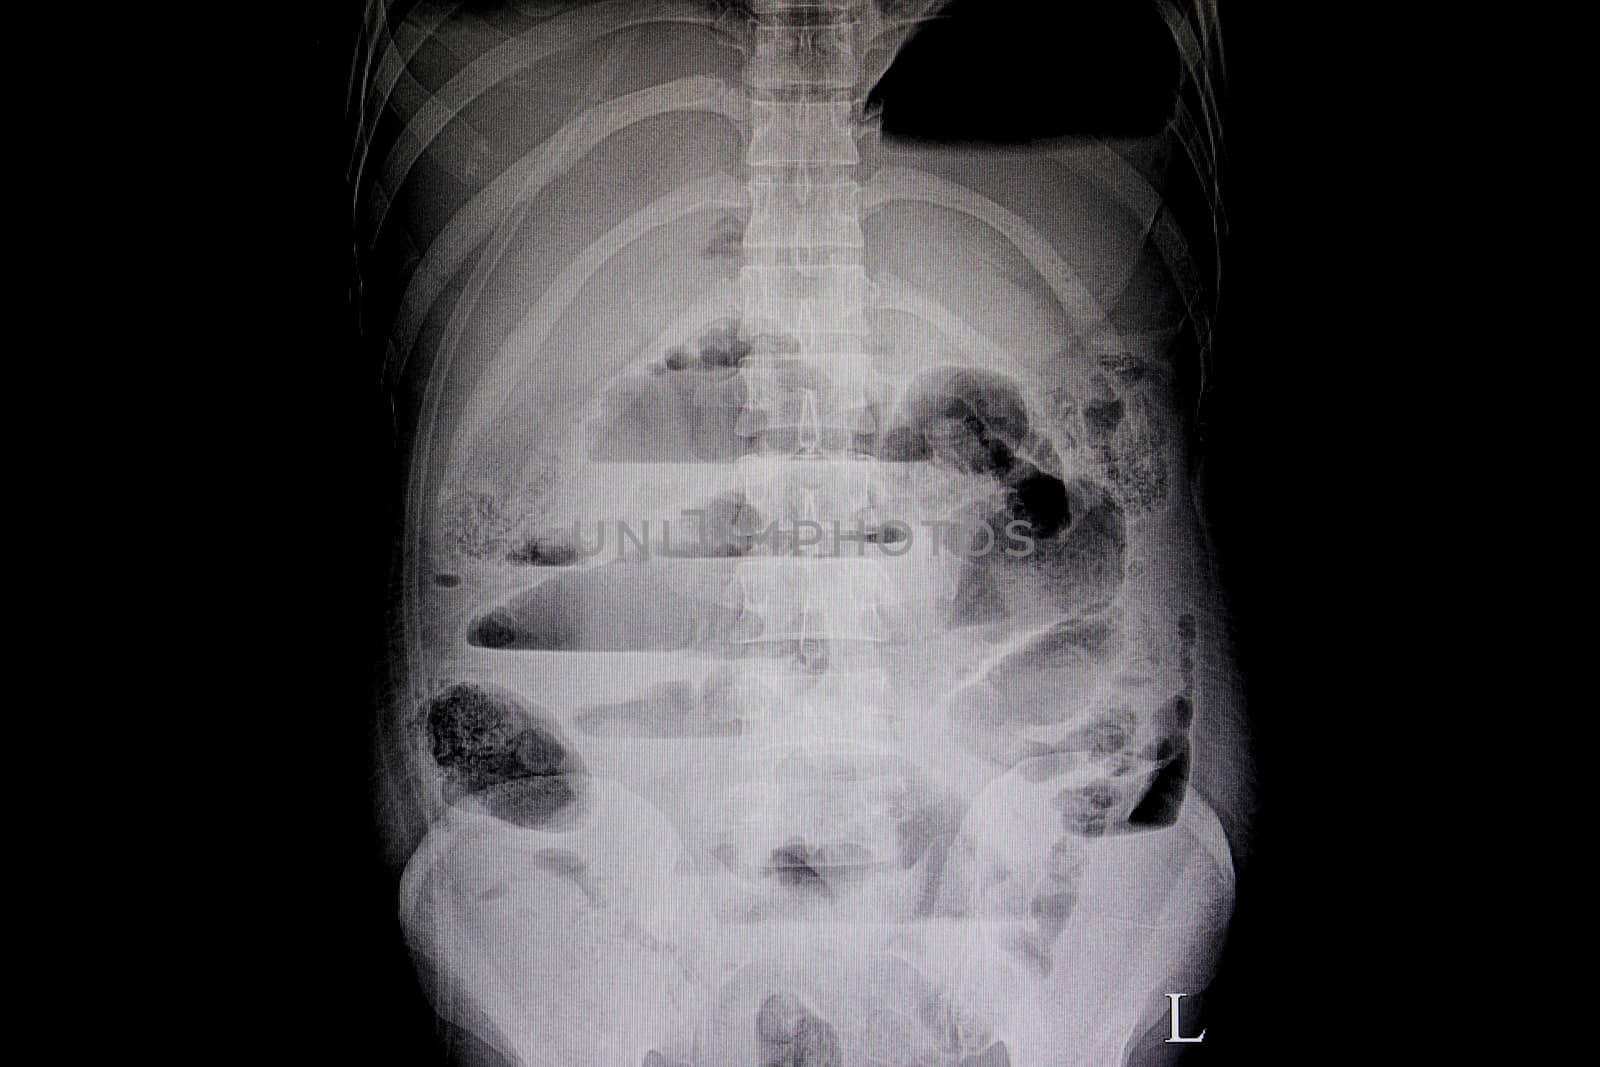 A plain abdominal upright film of a patient showing mechanical bowel obstration with internal air fluid level in loop of bowels. Step ladder pattern film.